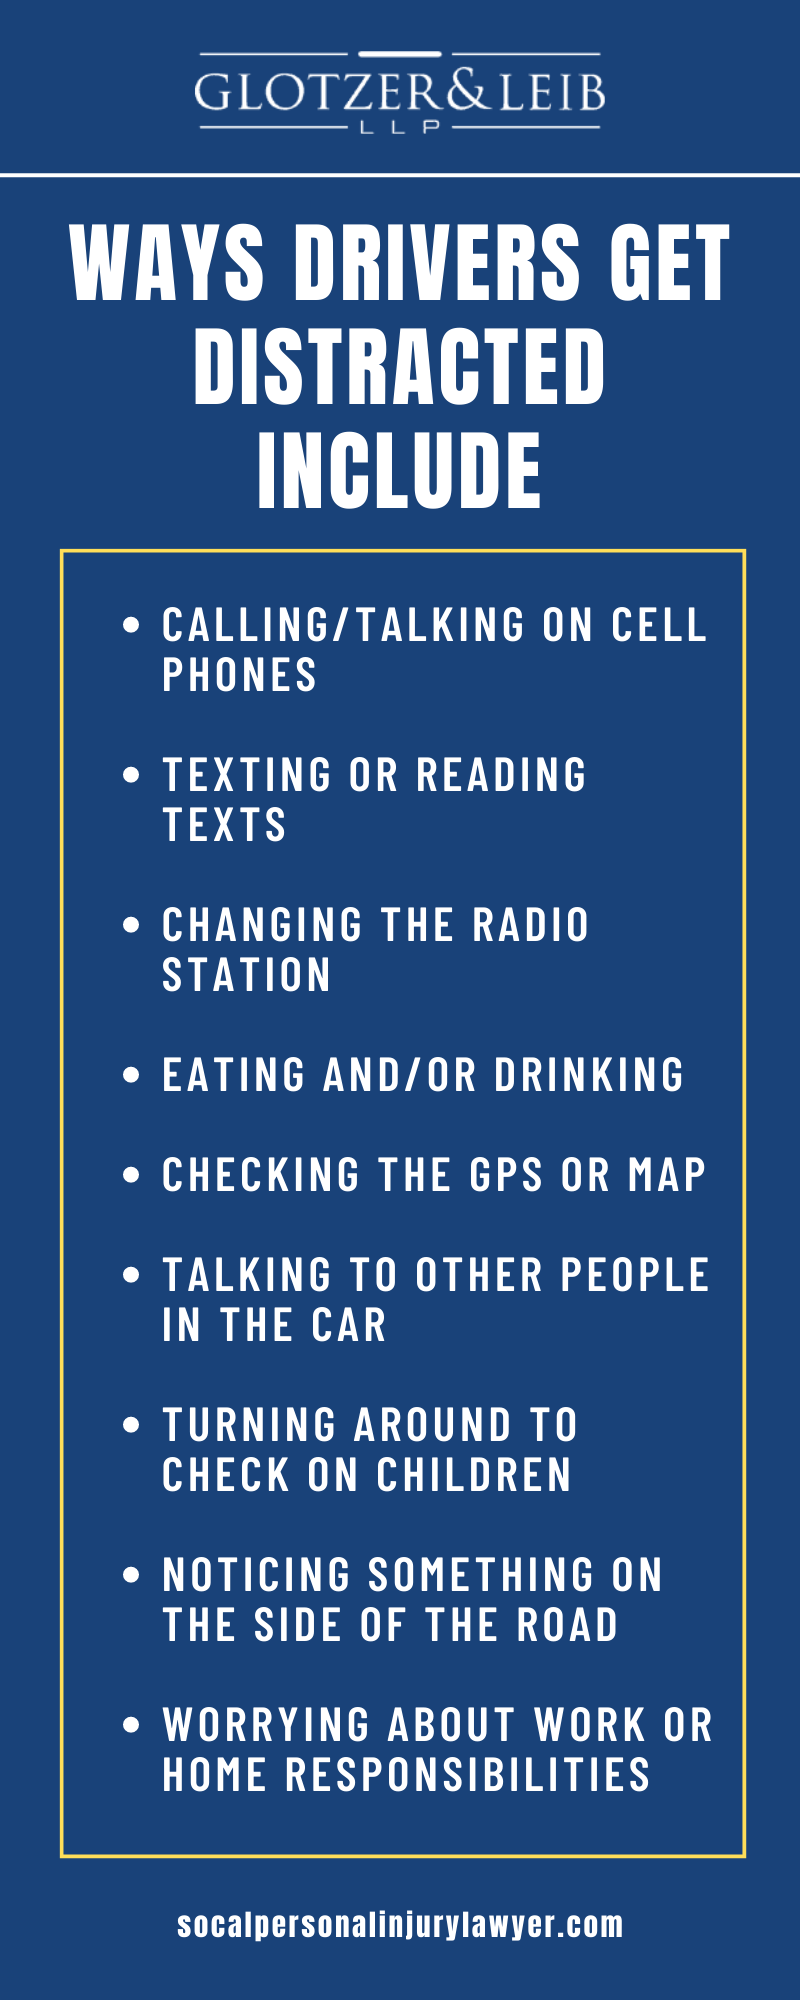 WAYS DRIVERS GET DISTRACTED INCLUDE INFOGRAPHIC